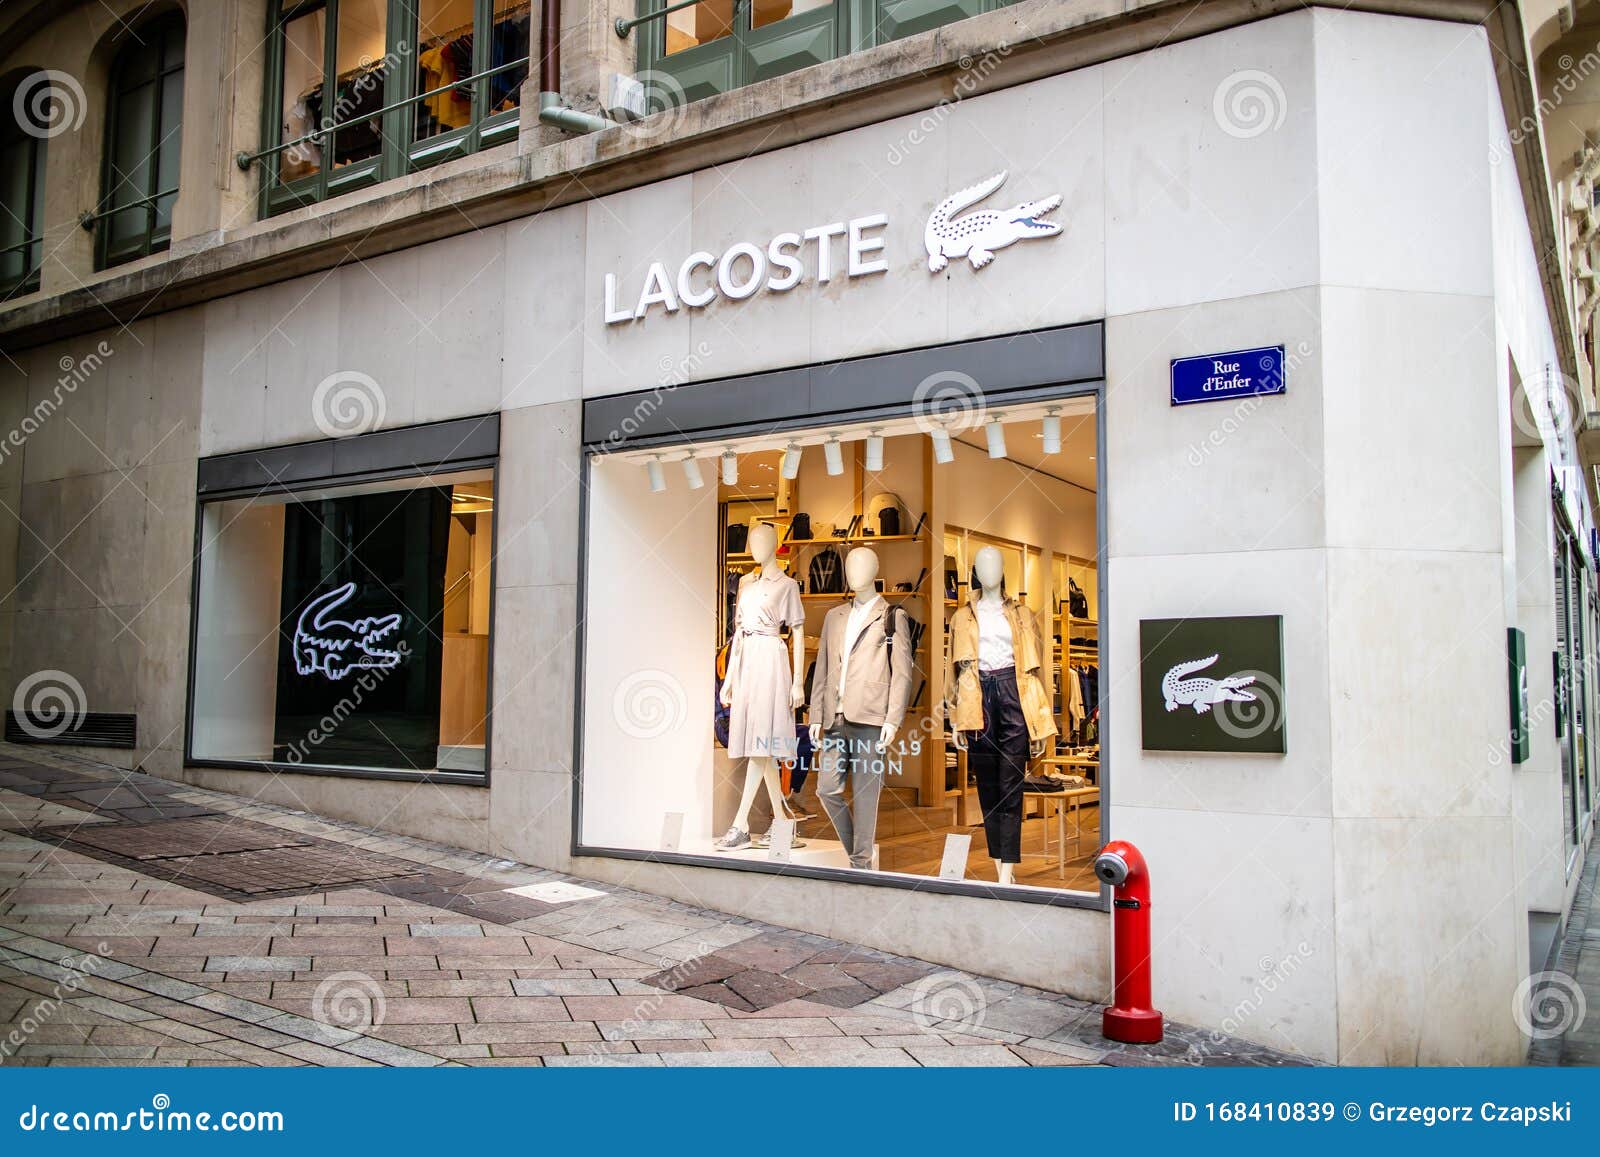 Lacoste Joins Influencer Marketing Strategies